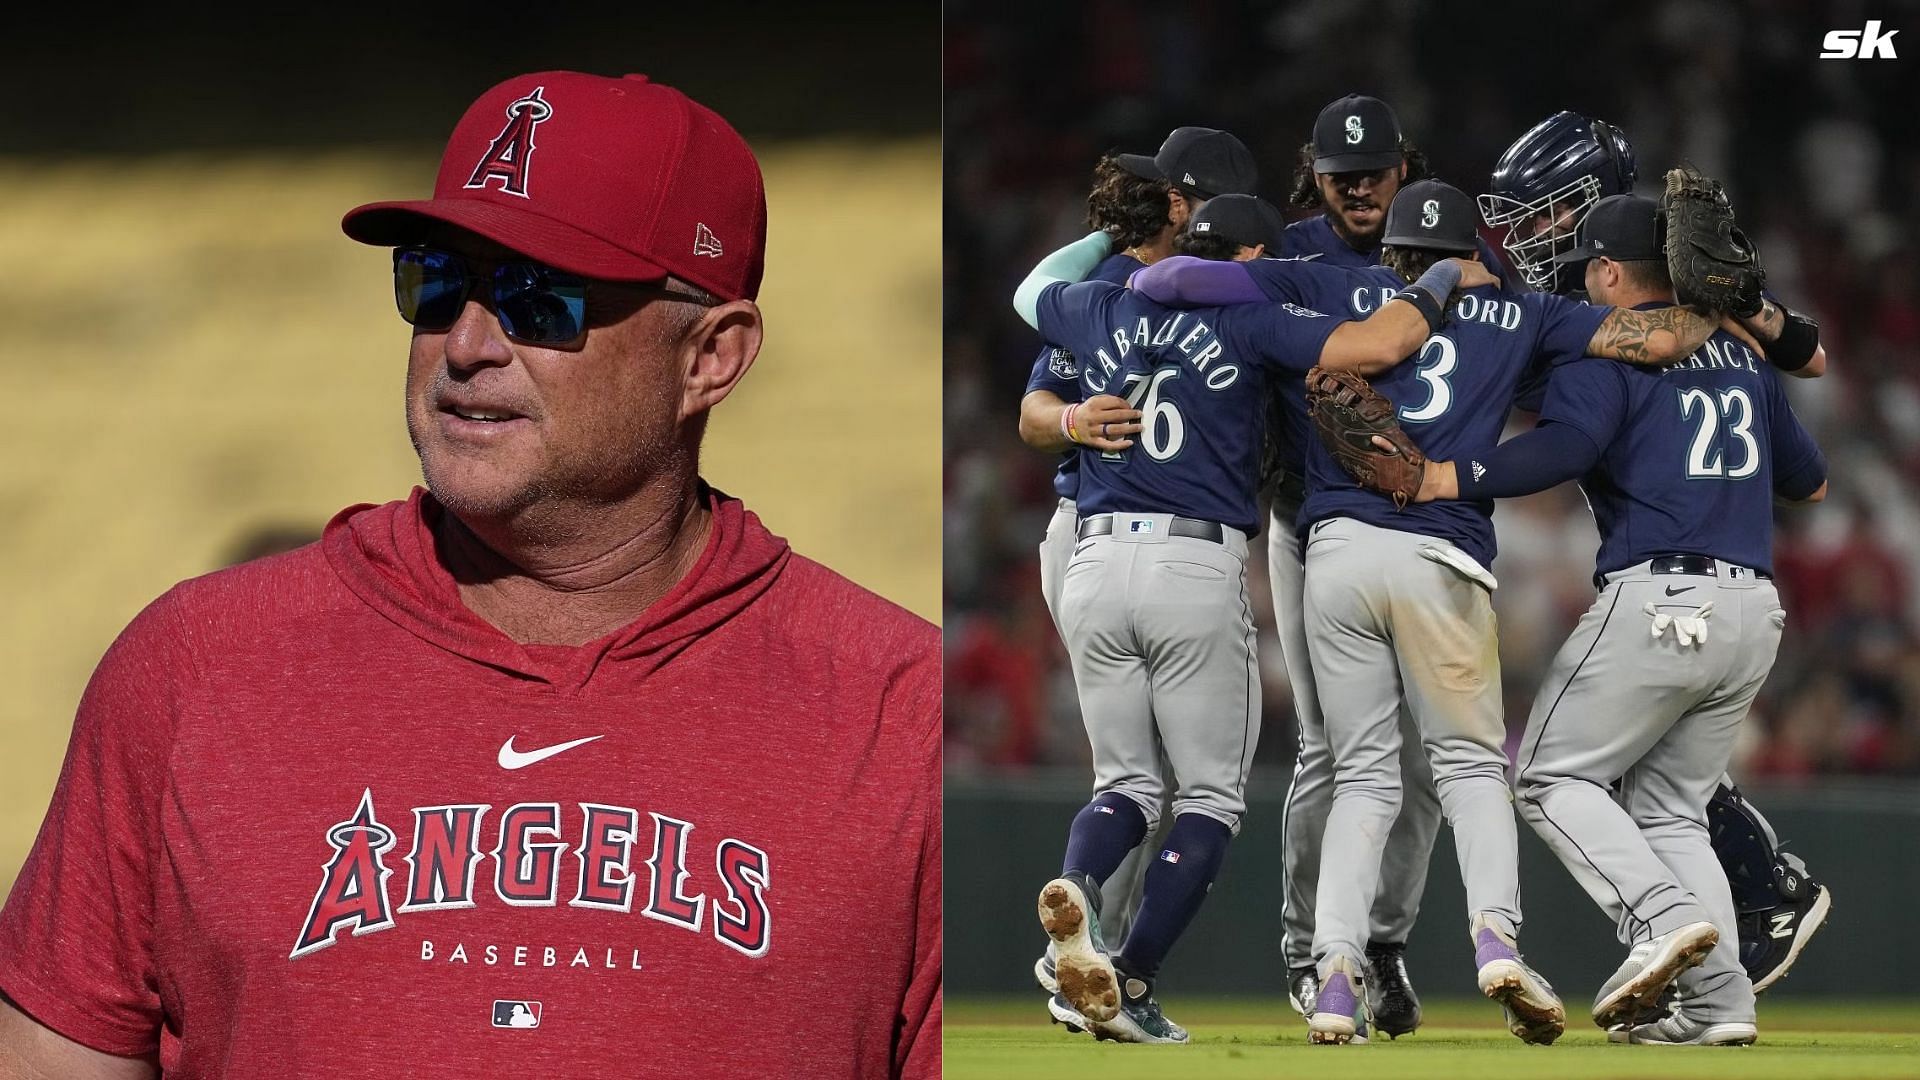 Phil Nevin spoke about the Los Angeles Angels misfortune after their recent loss against the Seattle Mariners.